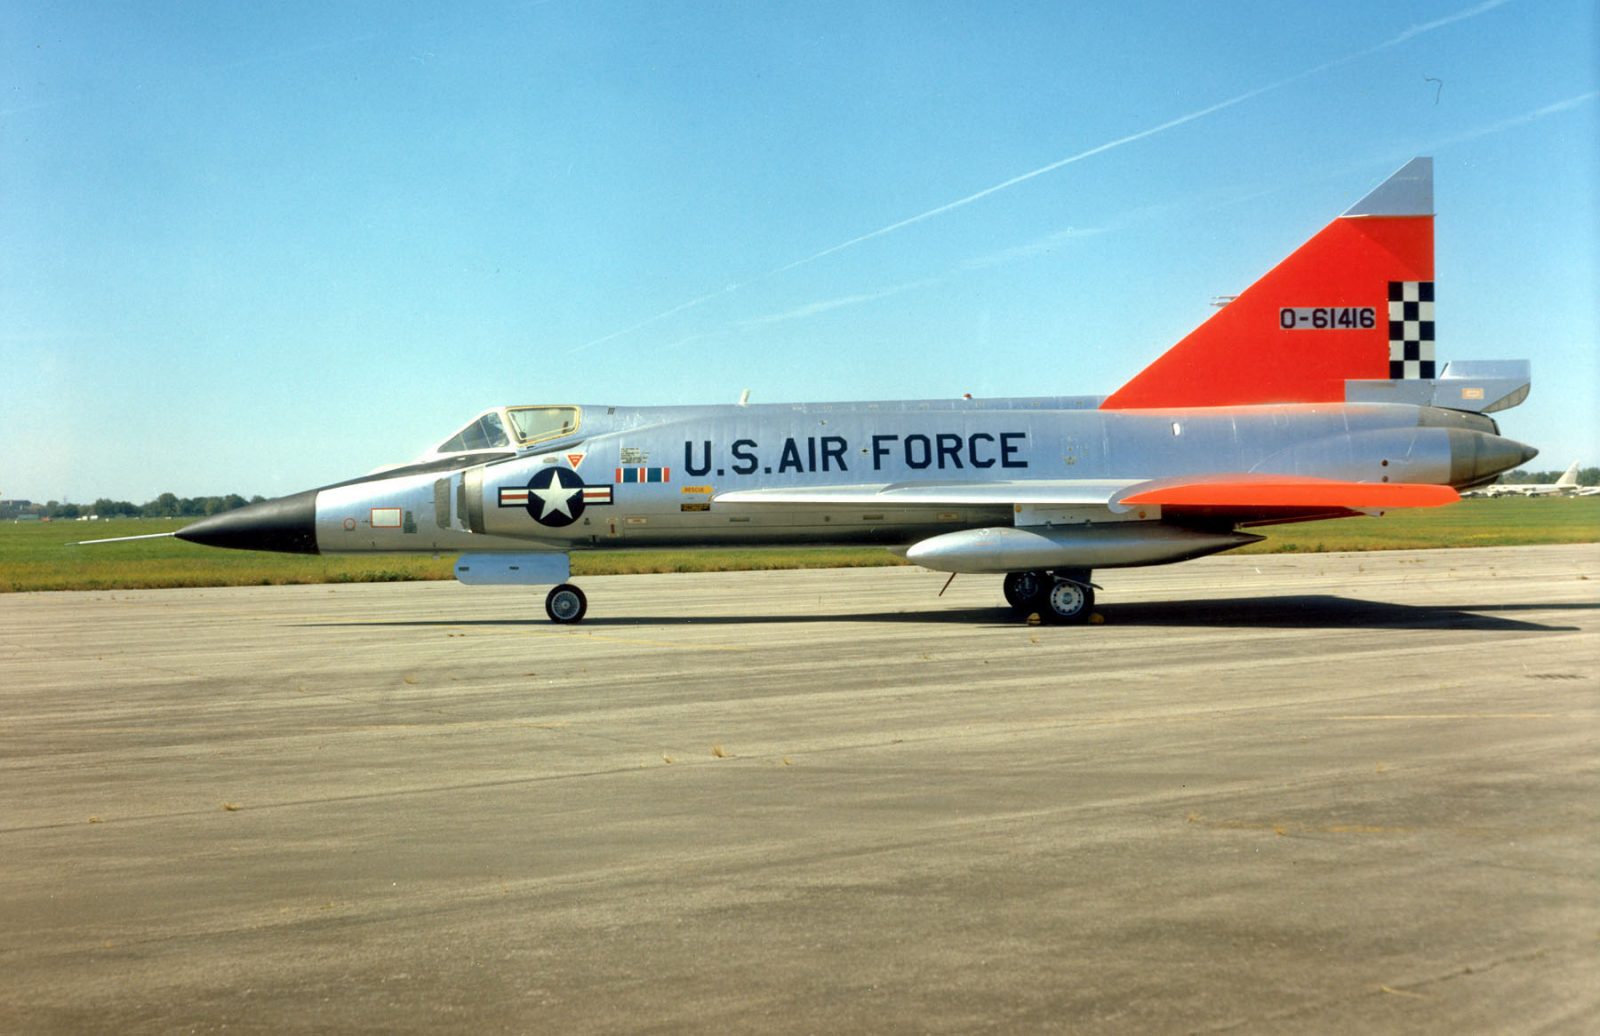 Convair F-102 Delta Dagger: The Interceptor of the United States Air Force (USAF)